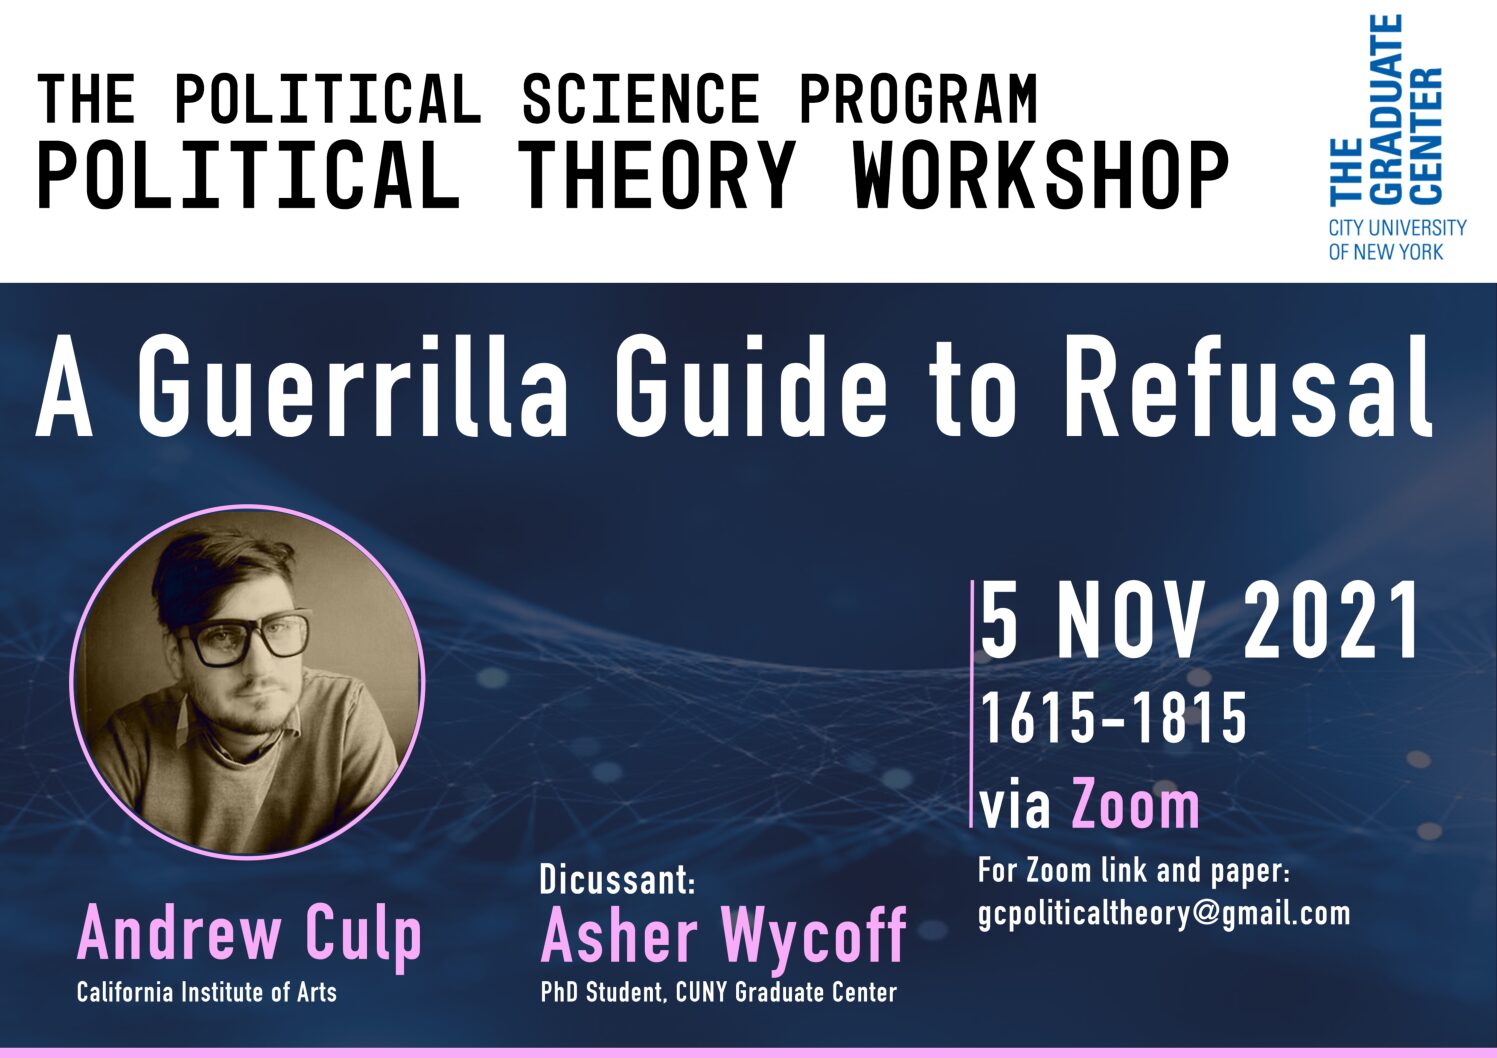 Political Theory Workshop: Andrew Culp, "A Guerrilla Guide to Refusal," Friday, November 5th, 4:15-6:15pm